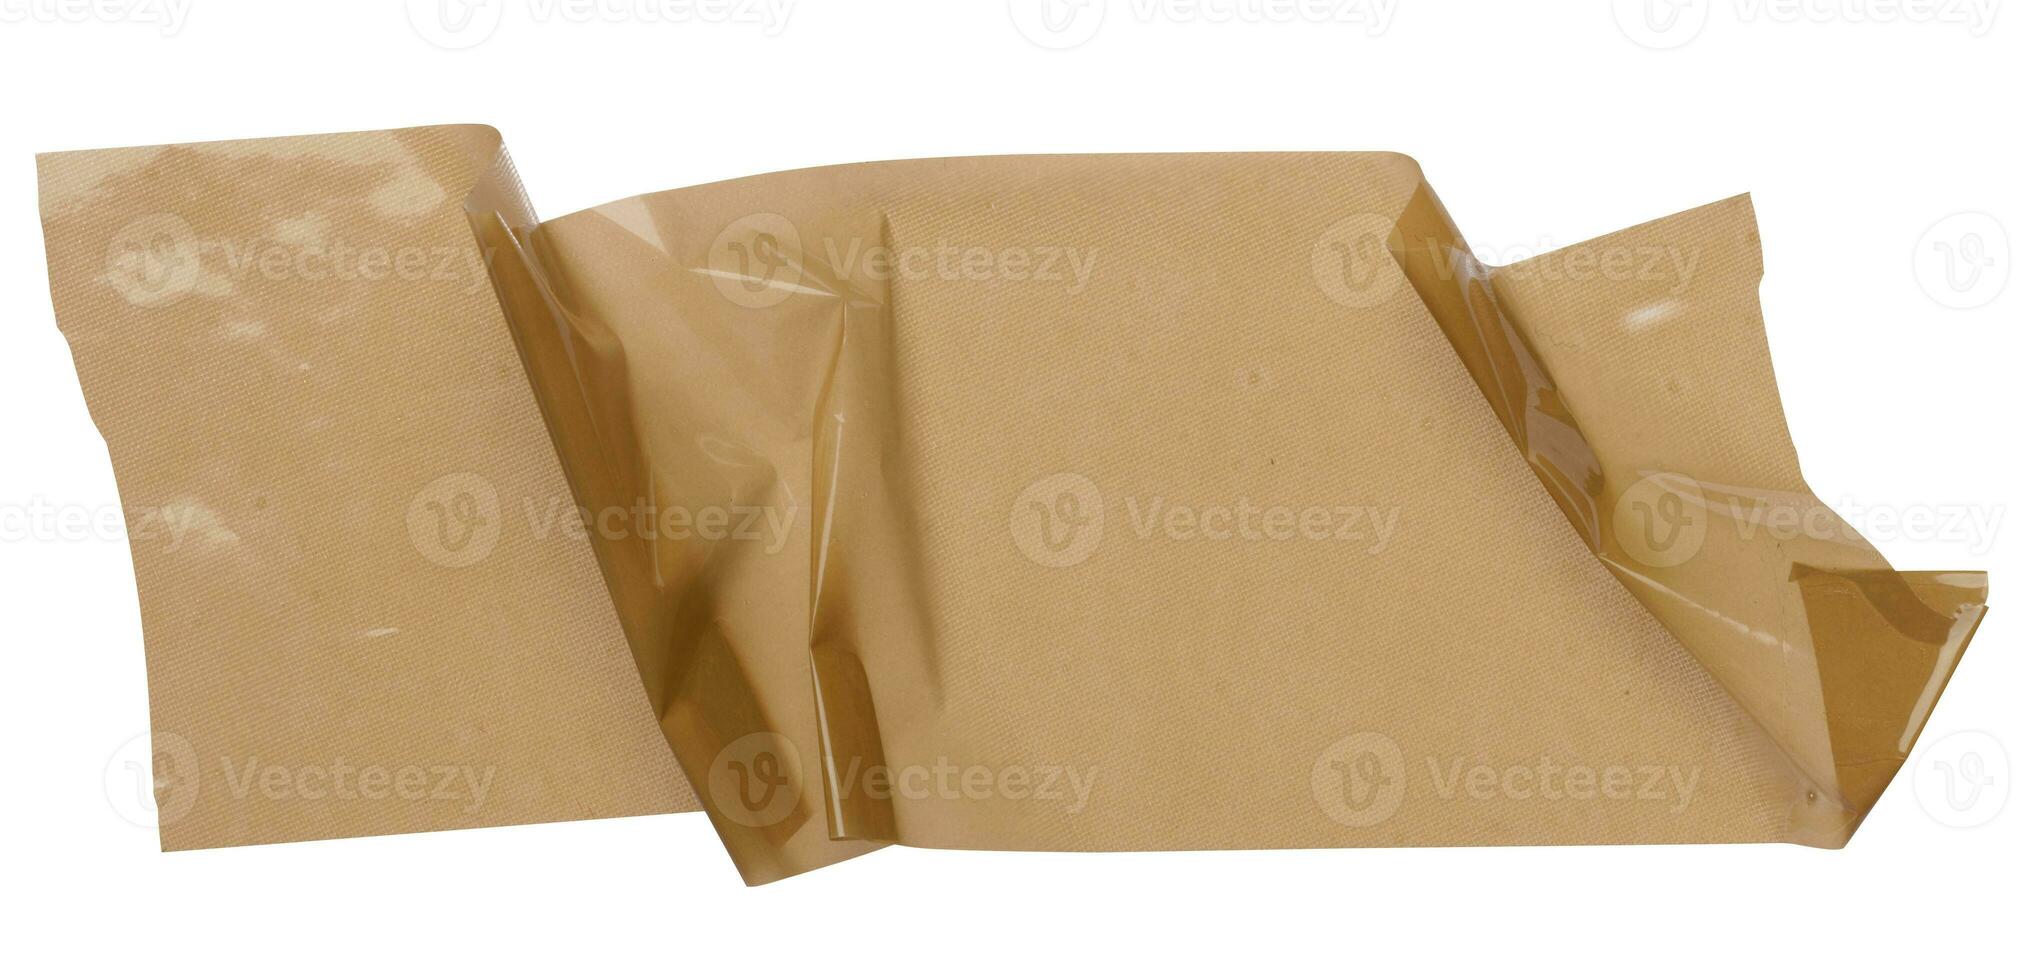 Crumpled piece of brown adhesive cellophane tape, packaging material photo